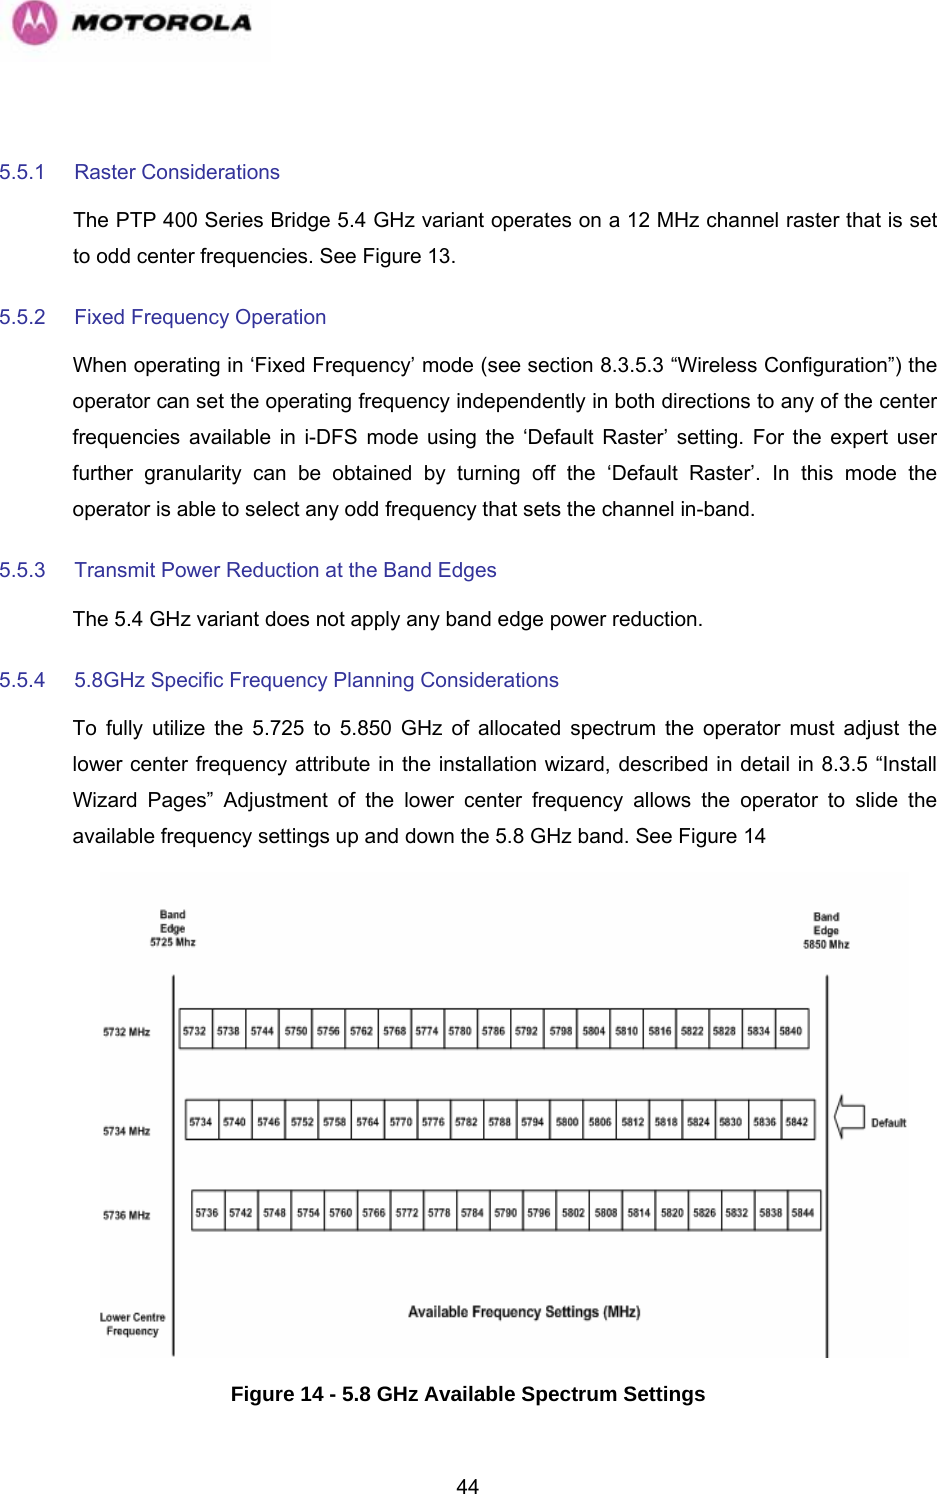   44 5.5.1 Raster Considerations The PTP 400 Series Bridge 5.4 GHz variant operates on a 12 MHz channel raster that is set to odd center frequencies. See Figure 13. 5.5.2  Fixed Frequency Operation When operating in ‘Fixed Frequency’ mode (see section 8.3.5.3 “Wireless Configuration”) the operator can set the operating frequency independently in both directions to any of the center frequencies available in i-DFS mode using the ‘Default Raster’ setting. For the expert user further granularity can be obtained by turning off the ‘Default Raster’. In this mode the operator is able to select any odd frequency that sets the channel in-band.  5.5.3  Transmit Power Reduction at the Band Edges The 5.4 GHz variant does not apply any band edge power reduction.  5.5.4  5.8GHz Specific Frequency Planning Considerations To fully utilize the 5.725 to 5.850 GHz of allocated spectrum the operator must adjust the lower center frequency attribute in the installation wizard, described in detail in 8.3.5 “Install Wizard Pages” Adjustment of the lower center frequency allows the operator to slide the available frequency settings up and down the 5.8 GHz band. See Figure 14 Figure 14 - 5.8 GHz Available Spectrum Settings 